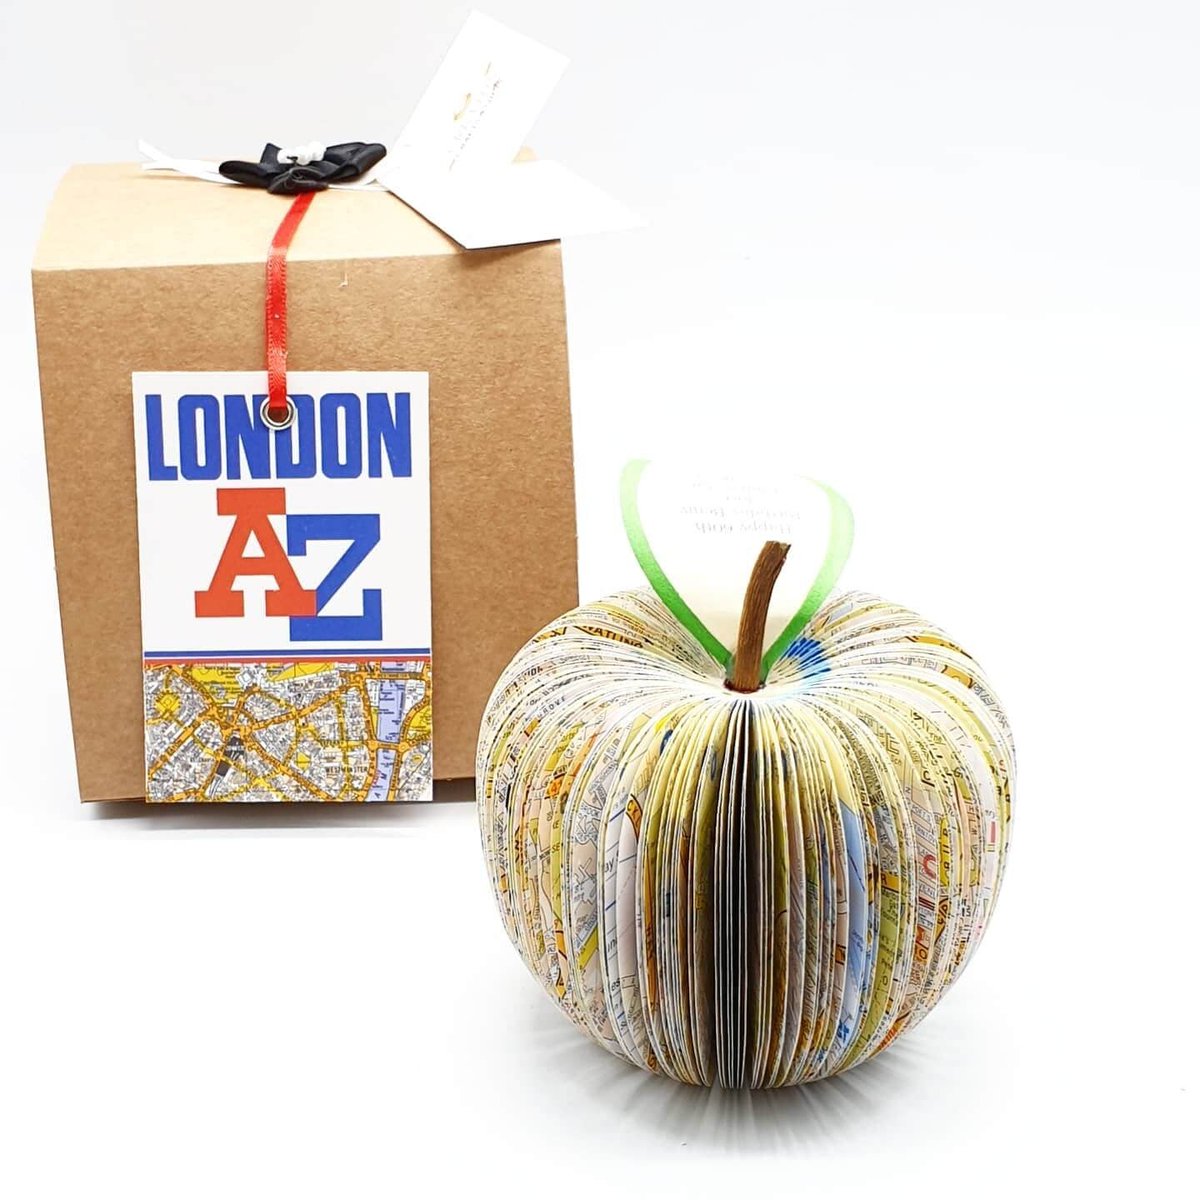 A-Z London Map Gift creatoncrafts.com/products/gift-… #mhhsbd #Shopify #CreatonCrafts #PaperDecorations